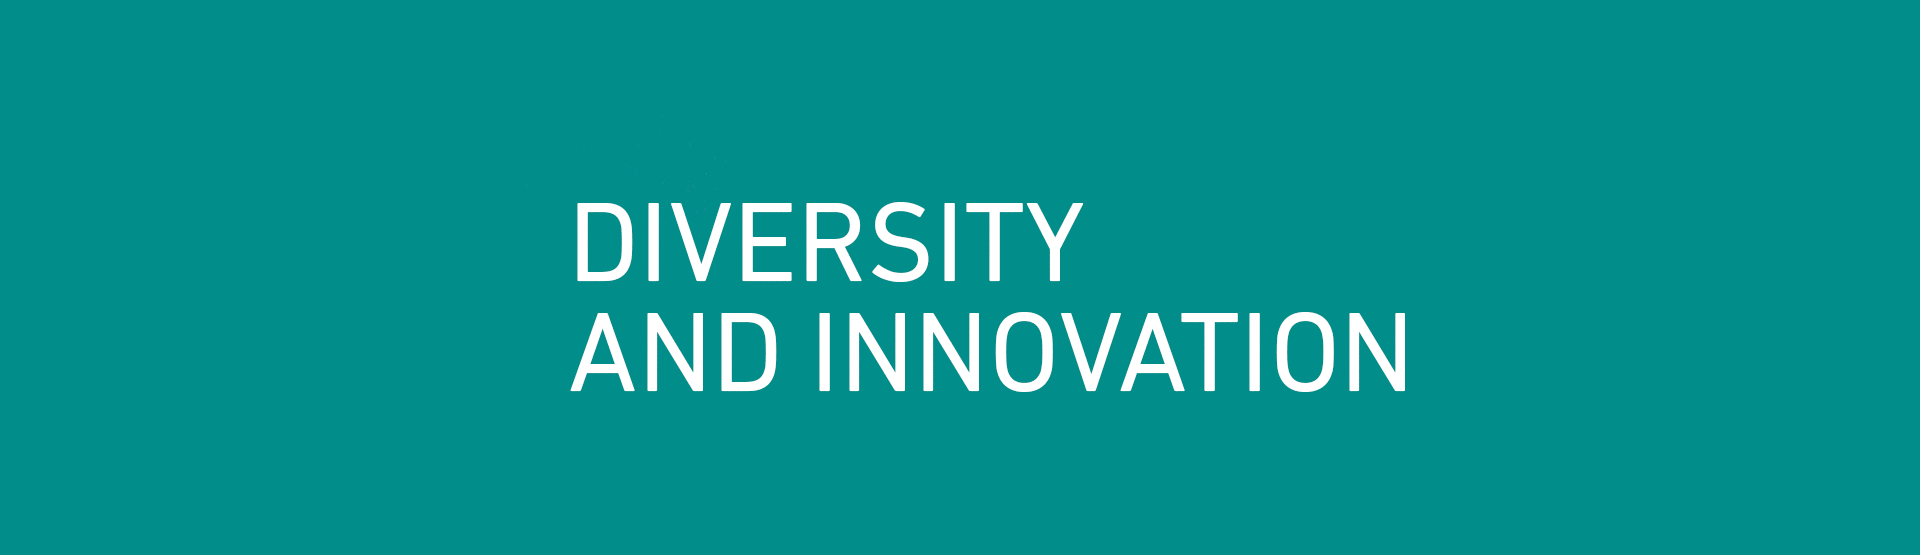 DIVERSITY-AND-INNOVATION